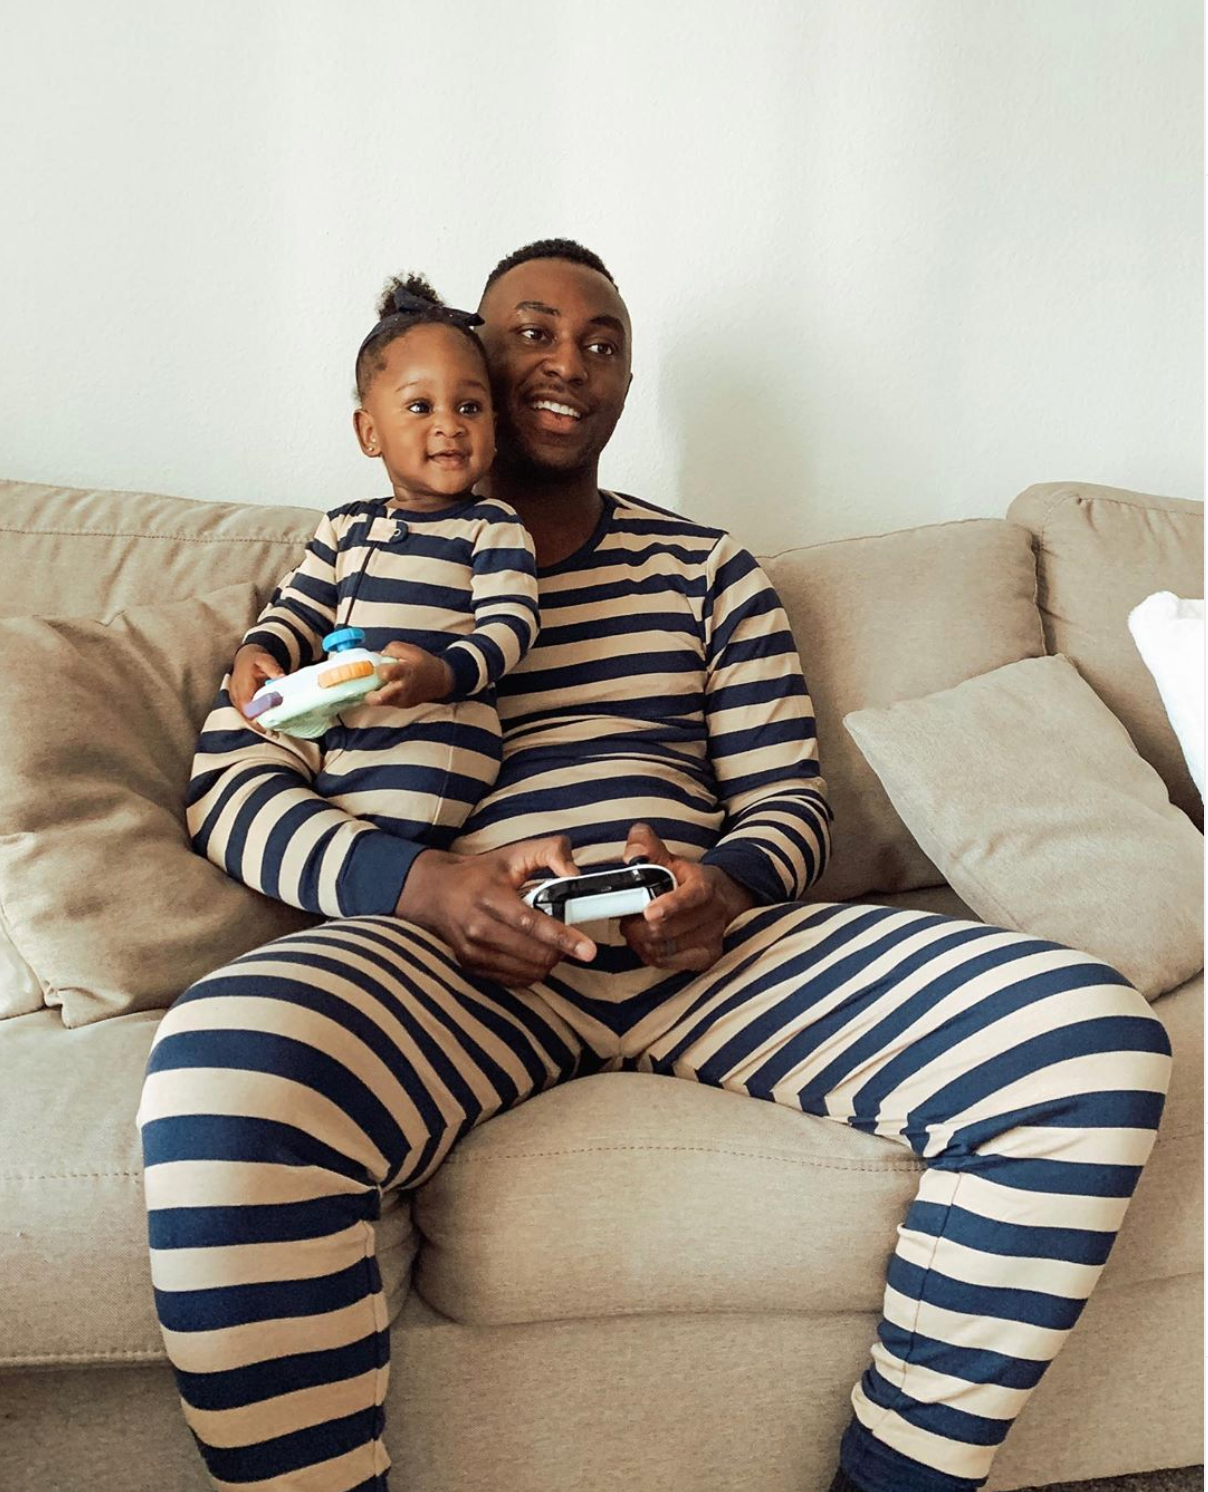 21 Powerful Images Of Black Dads In Action